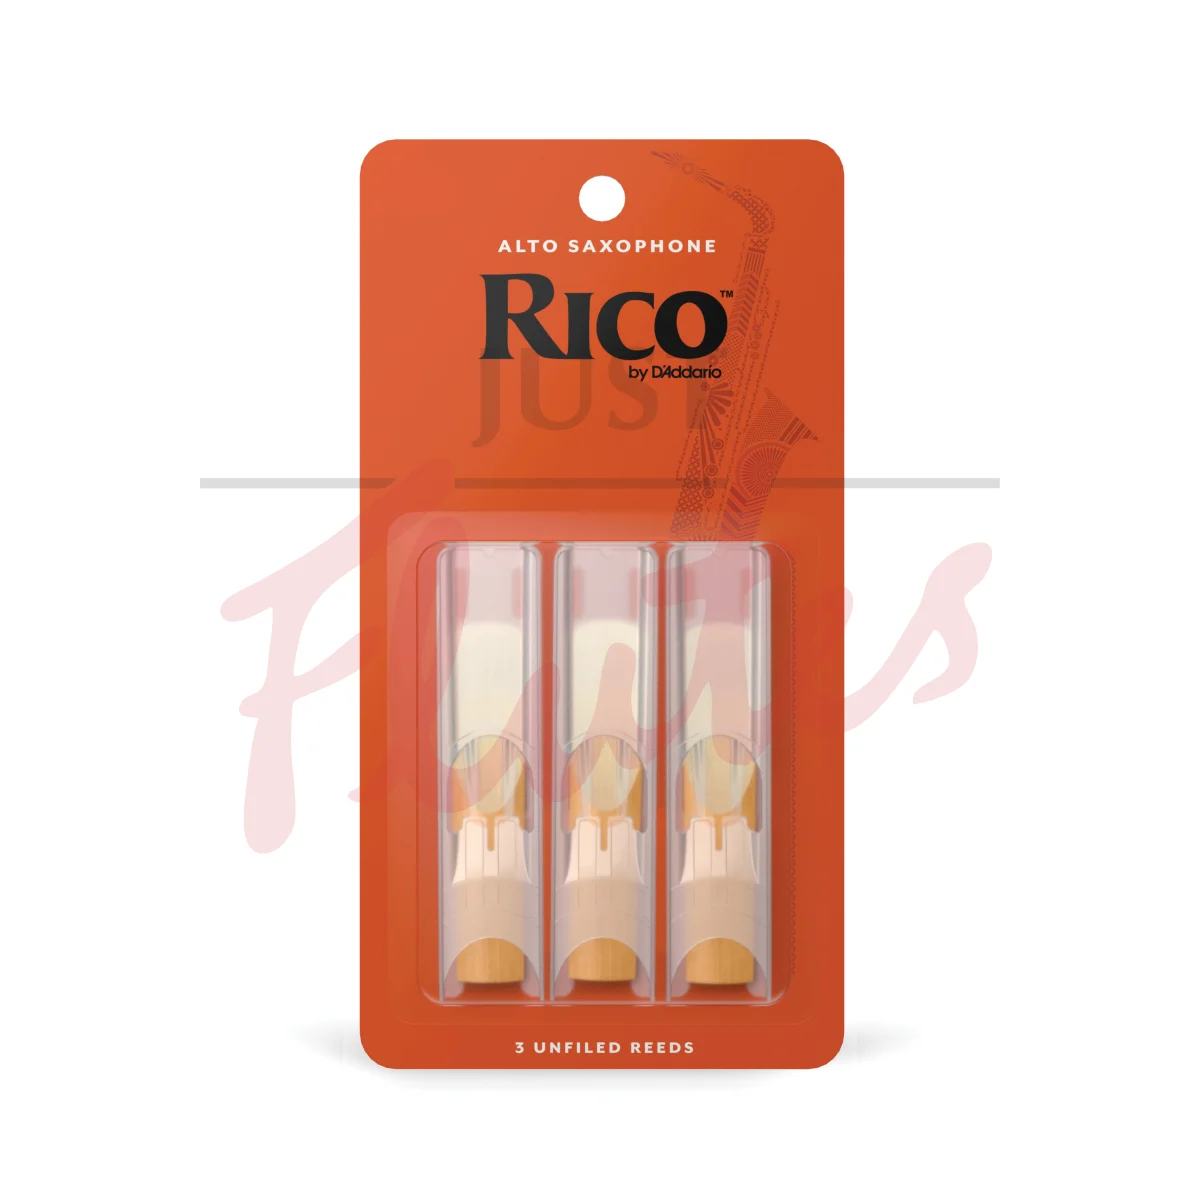 Rico by D'Addario RJA0320 Alto Saxophone Reeds, Strength 2, Pack of 3